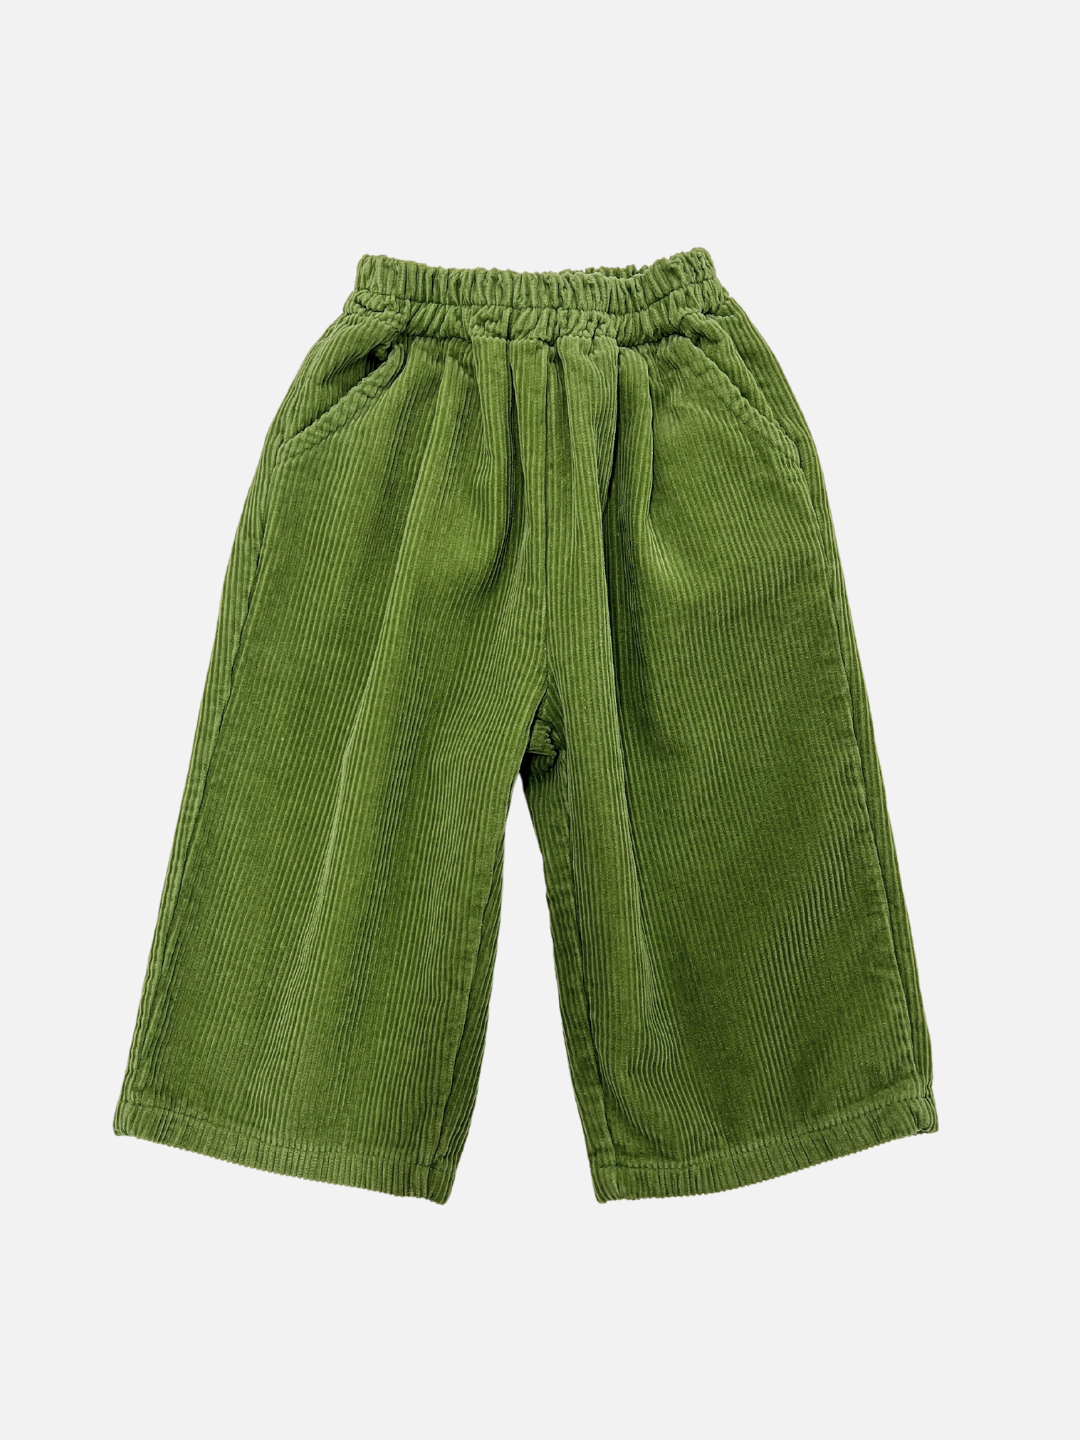 Moss | Front view of kids wide-leg corduroy pants in moss green..